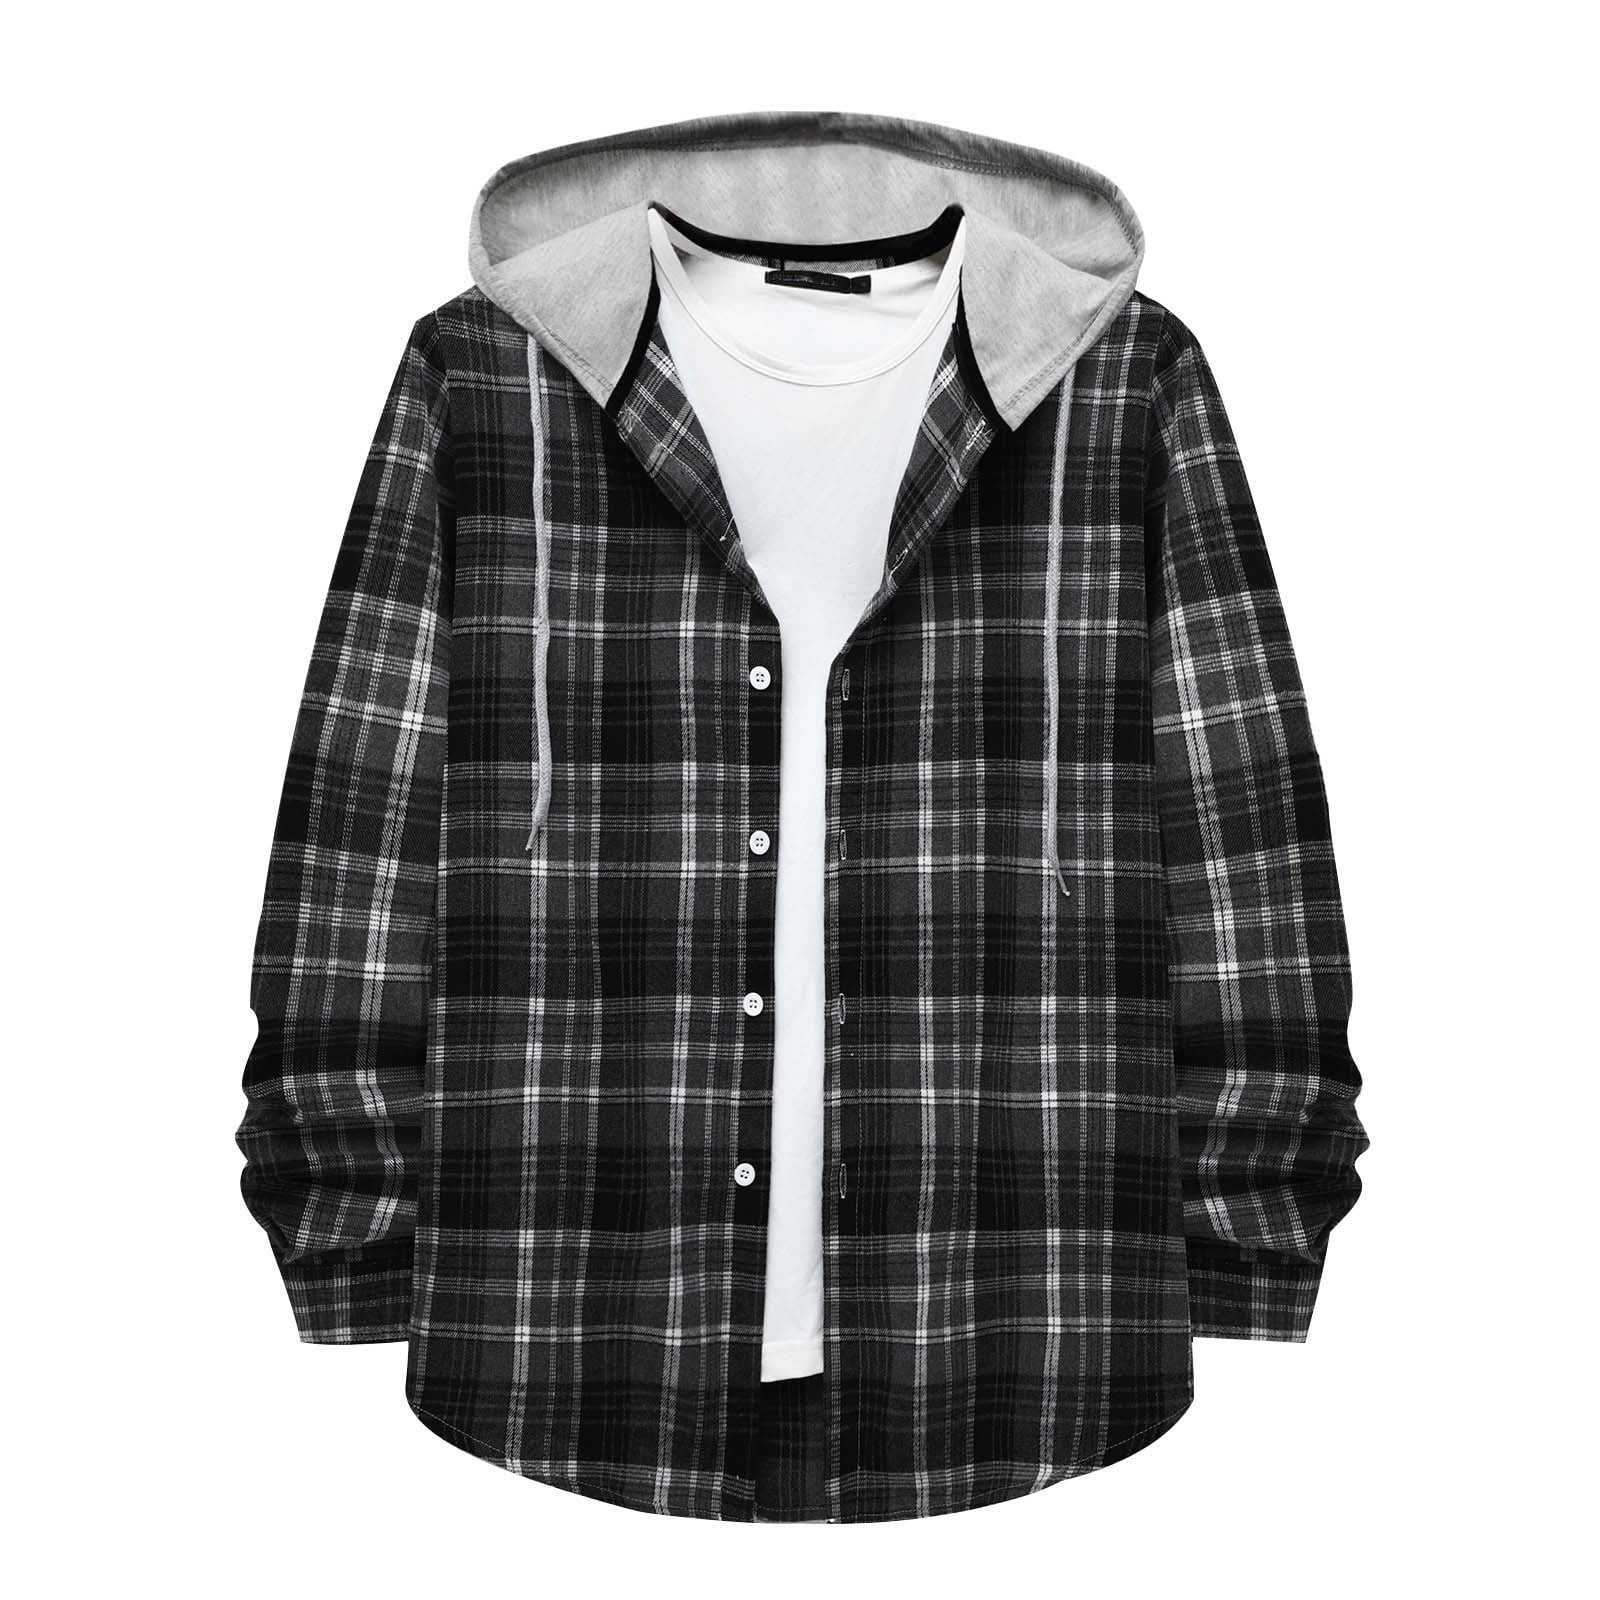 ZCFZJW Men's Flannel Plaid Hooded Shirts Casual Long Sleeve Button Down  Regular Fit Hooded Shirt Lightweight Thin Jackets Gray XXL